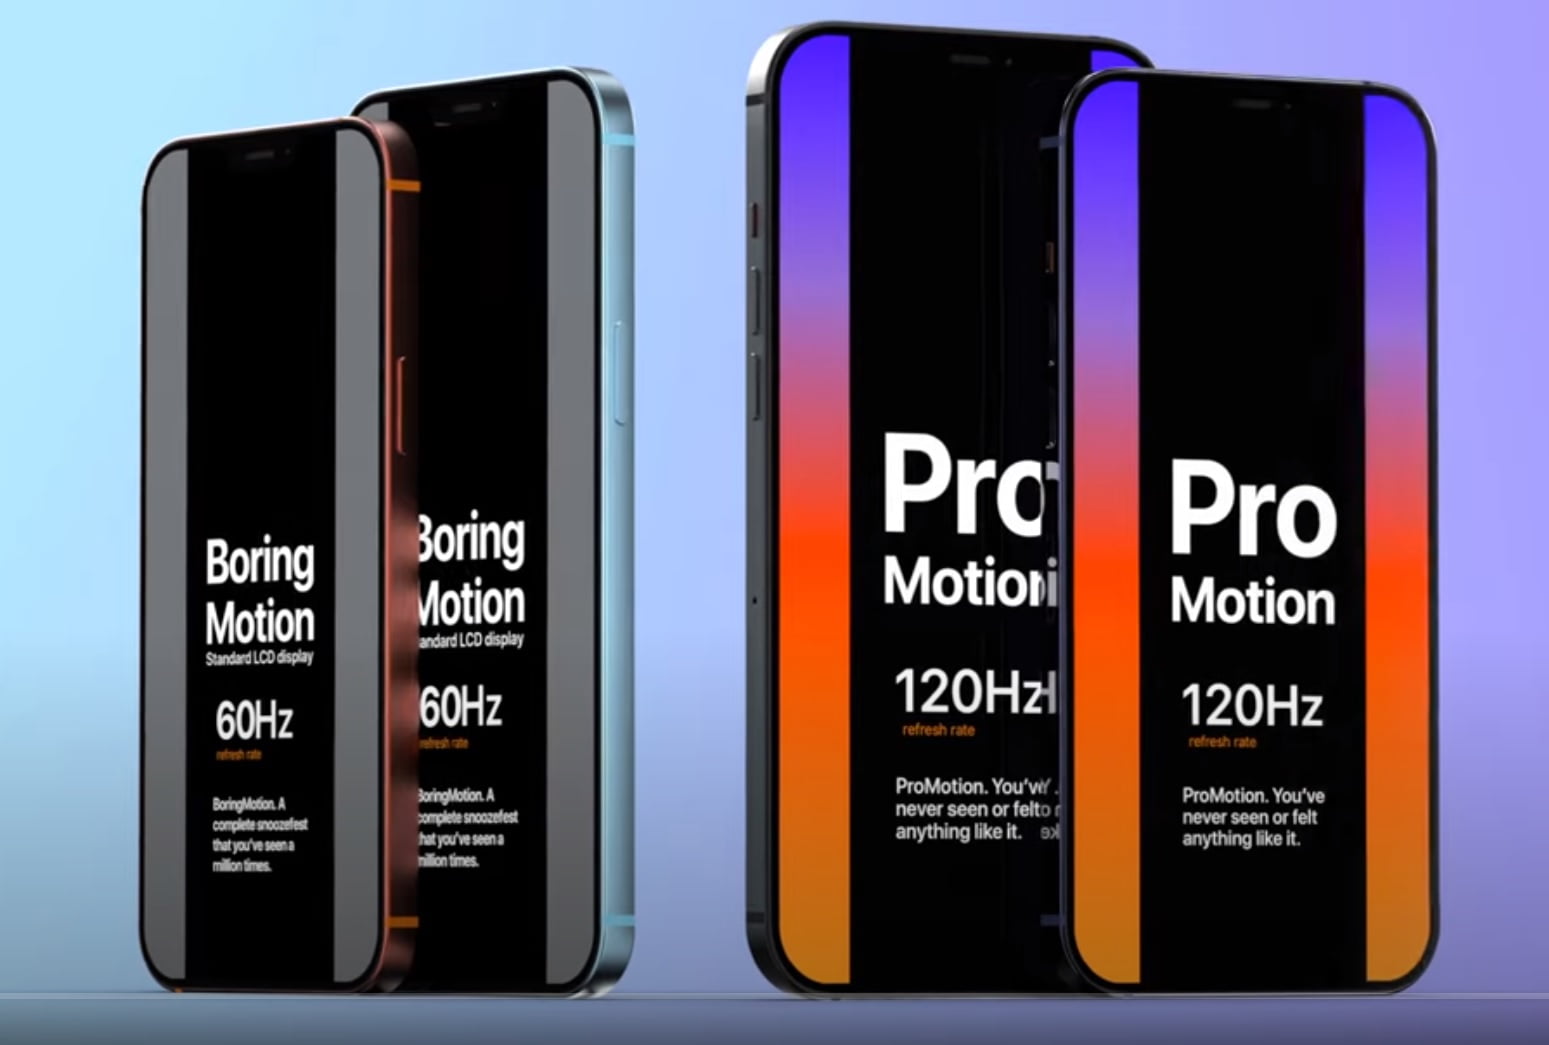 is iphone 12 pro worth the extra money